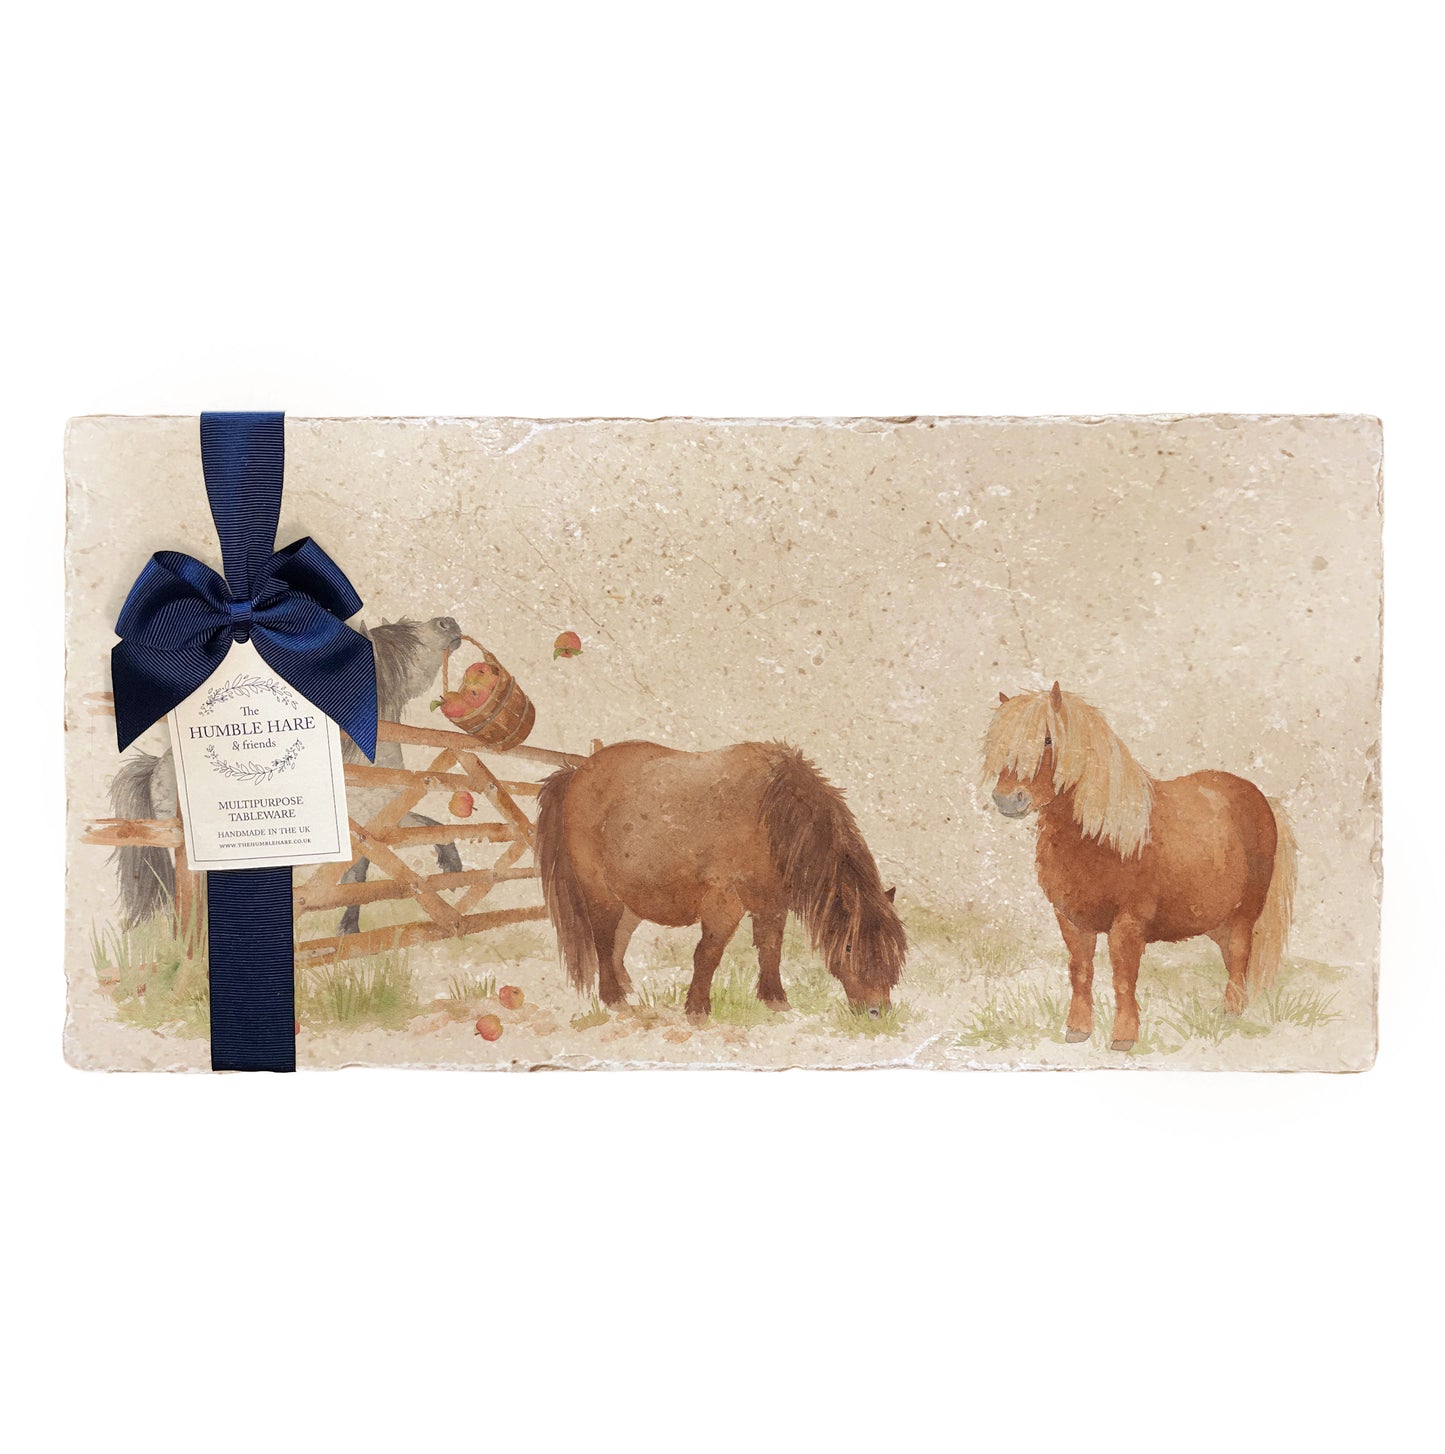 A multipurpose marble sharing platter with a watercolour Shetland pony design, packaged with a luxurious dark blue bow and branded gift tag.